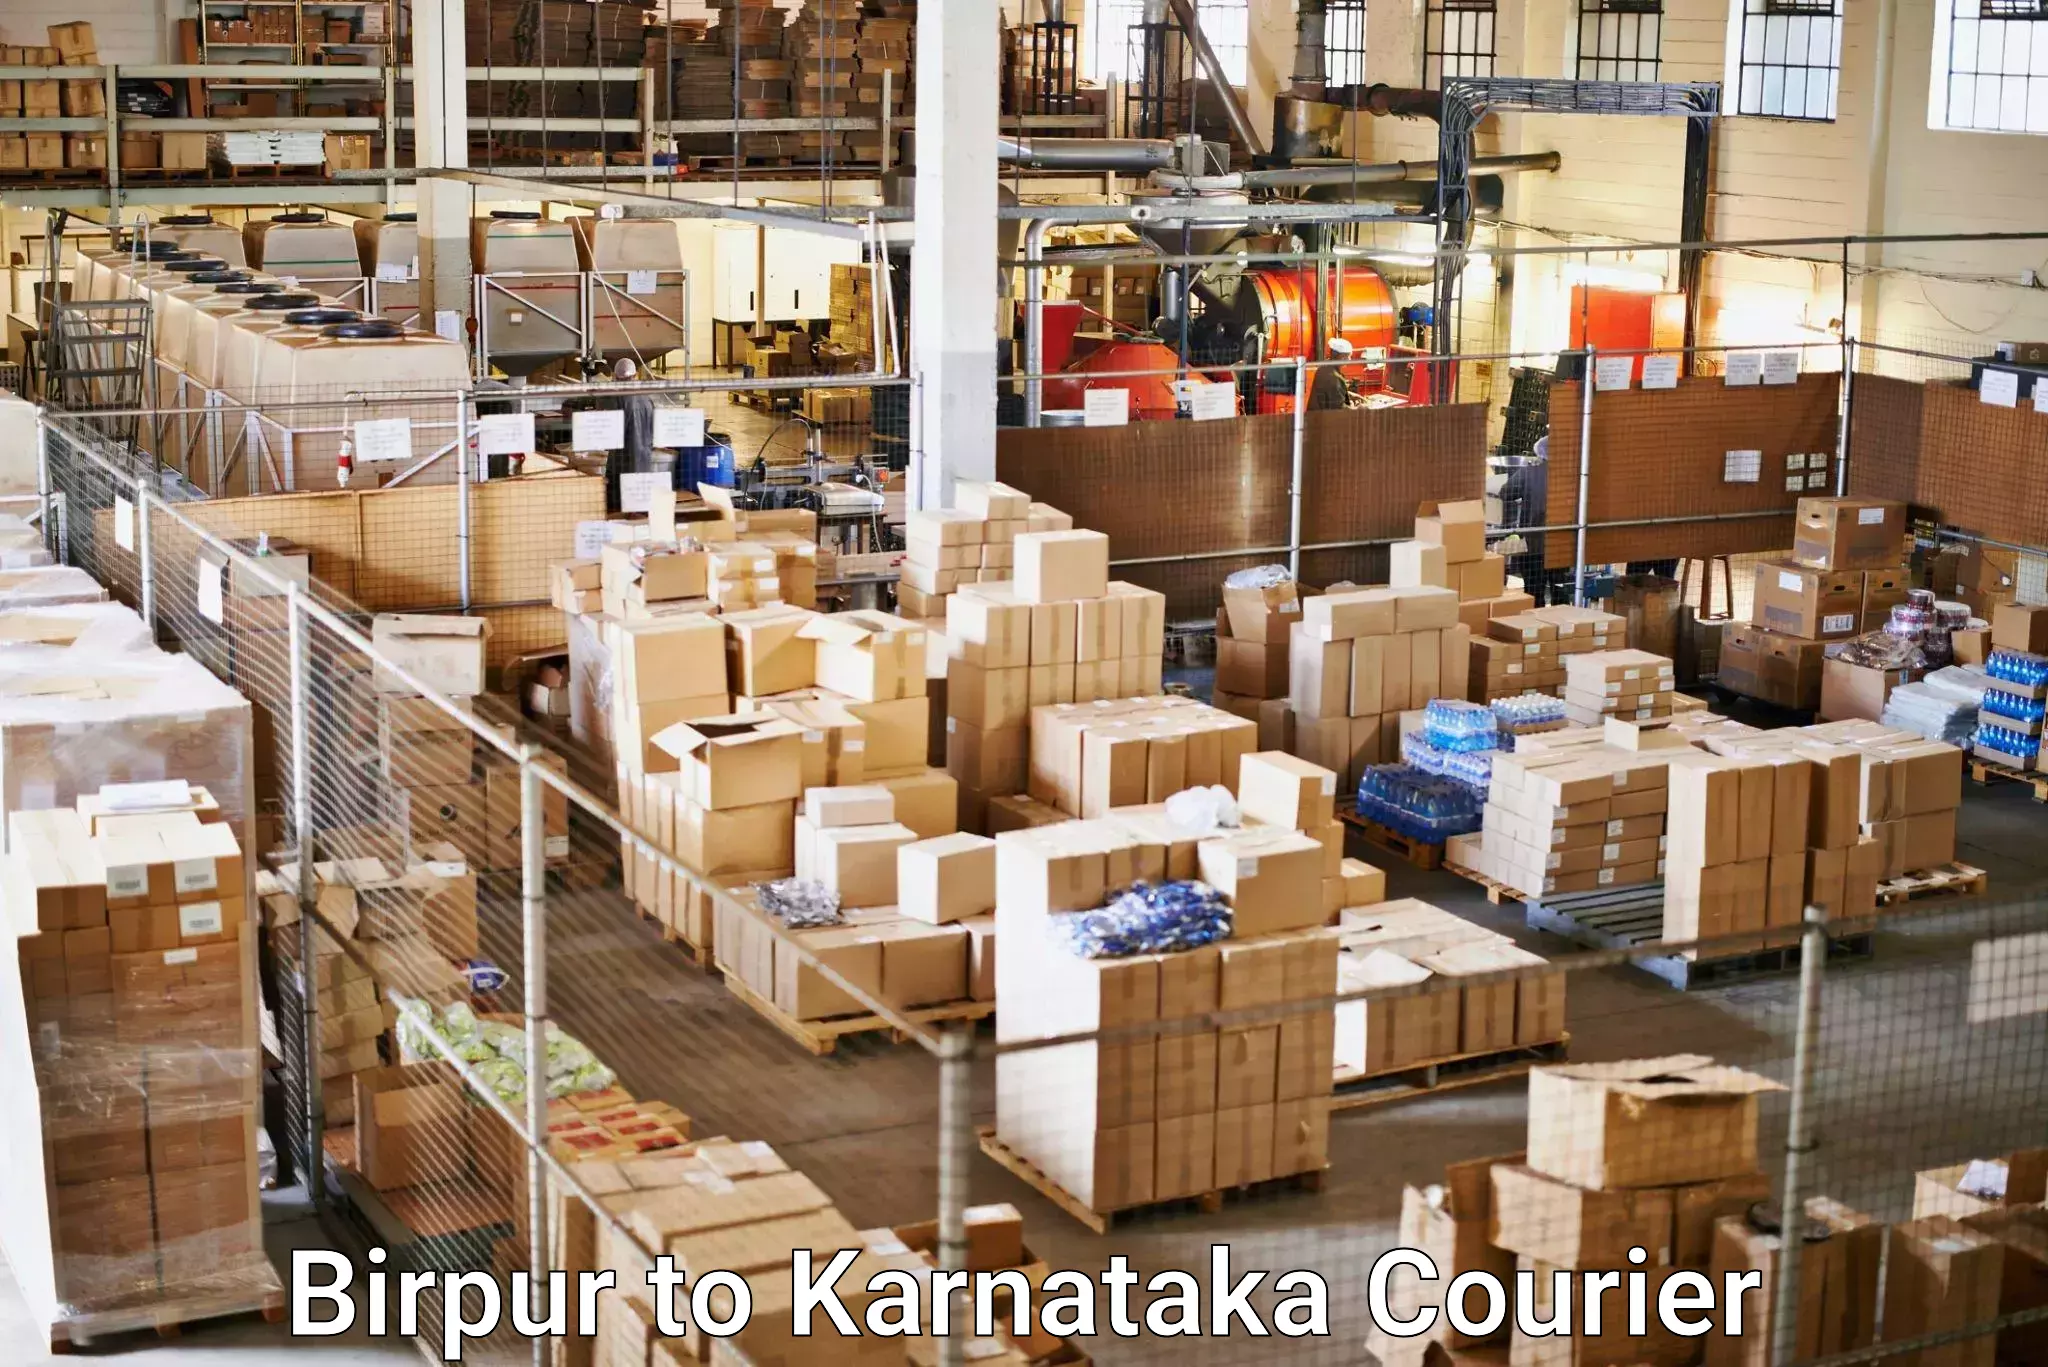 24/7 shipping services Birpur to Mangalore Port